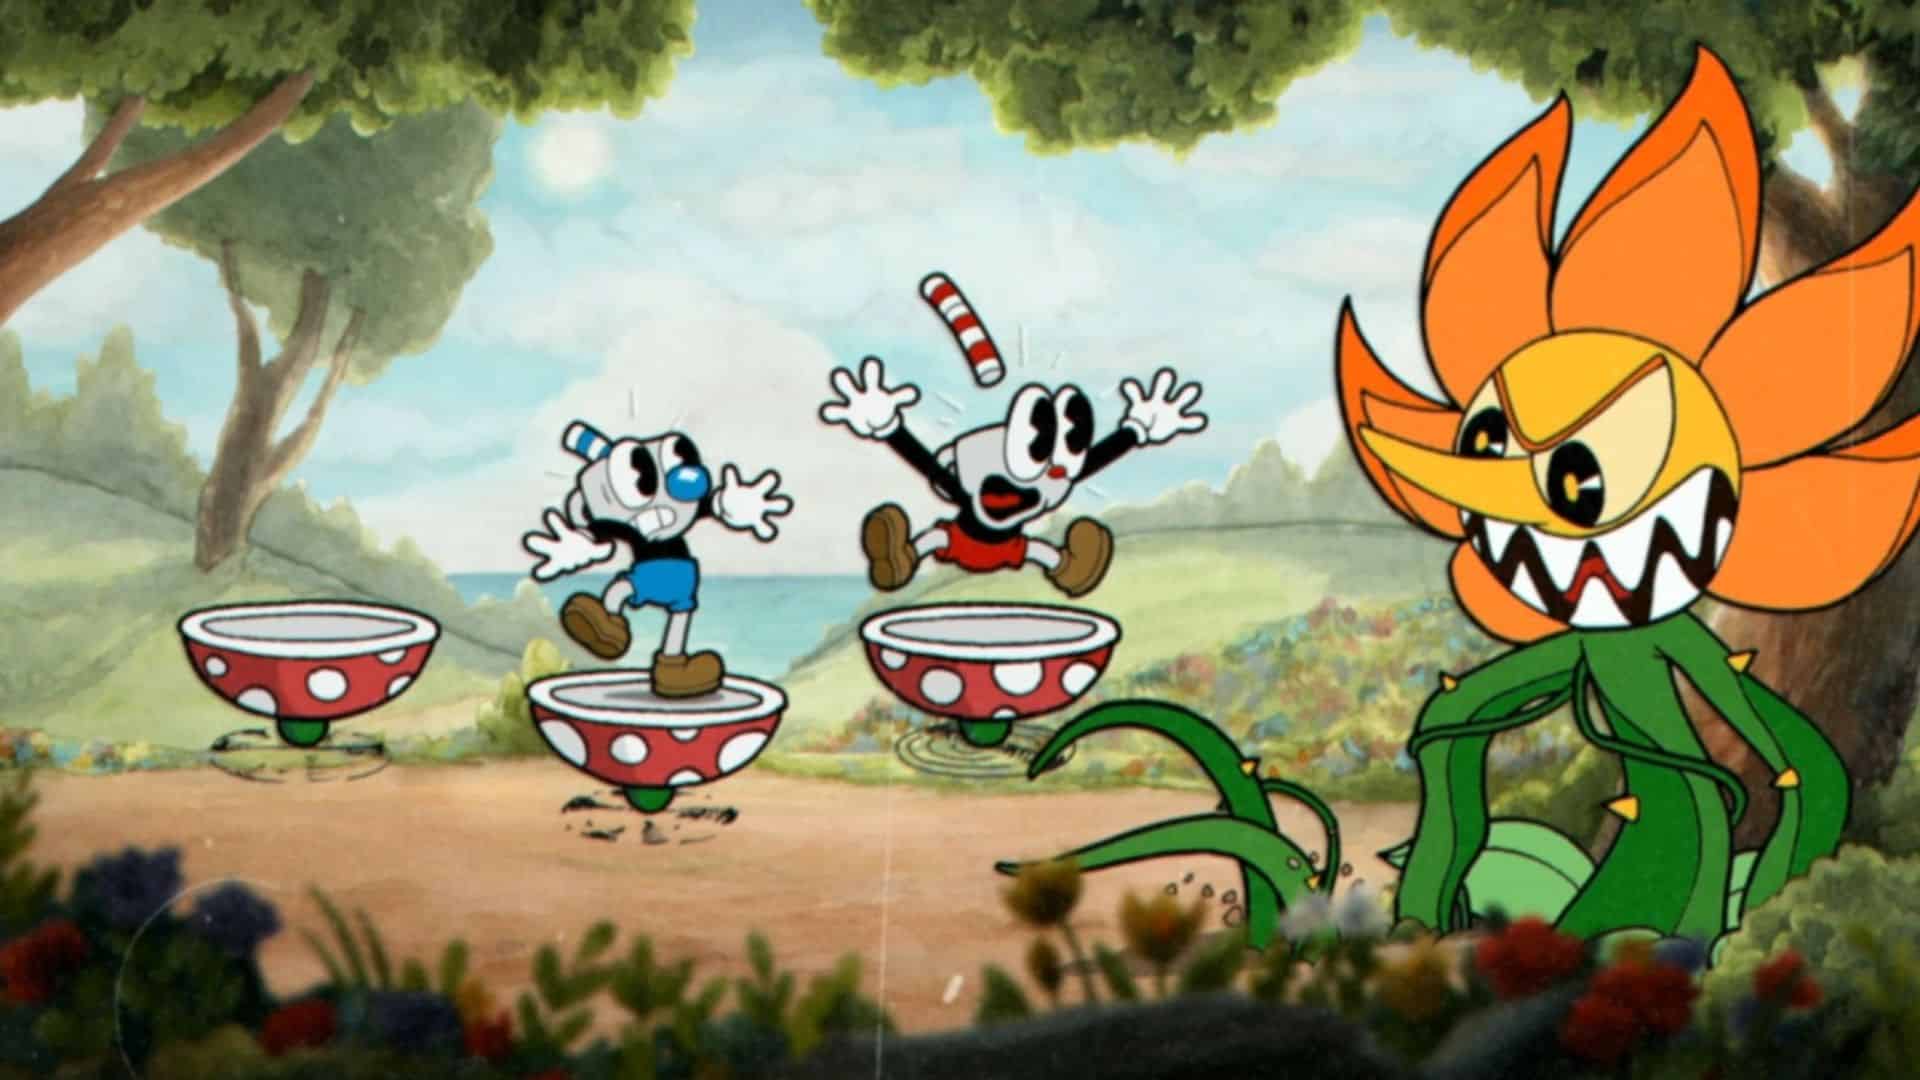 An image of cuphead and mugman fighting cagney carnation from Cuphead, one of the hardest games of all time.